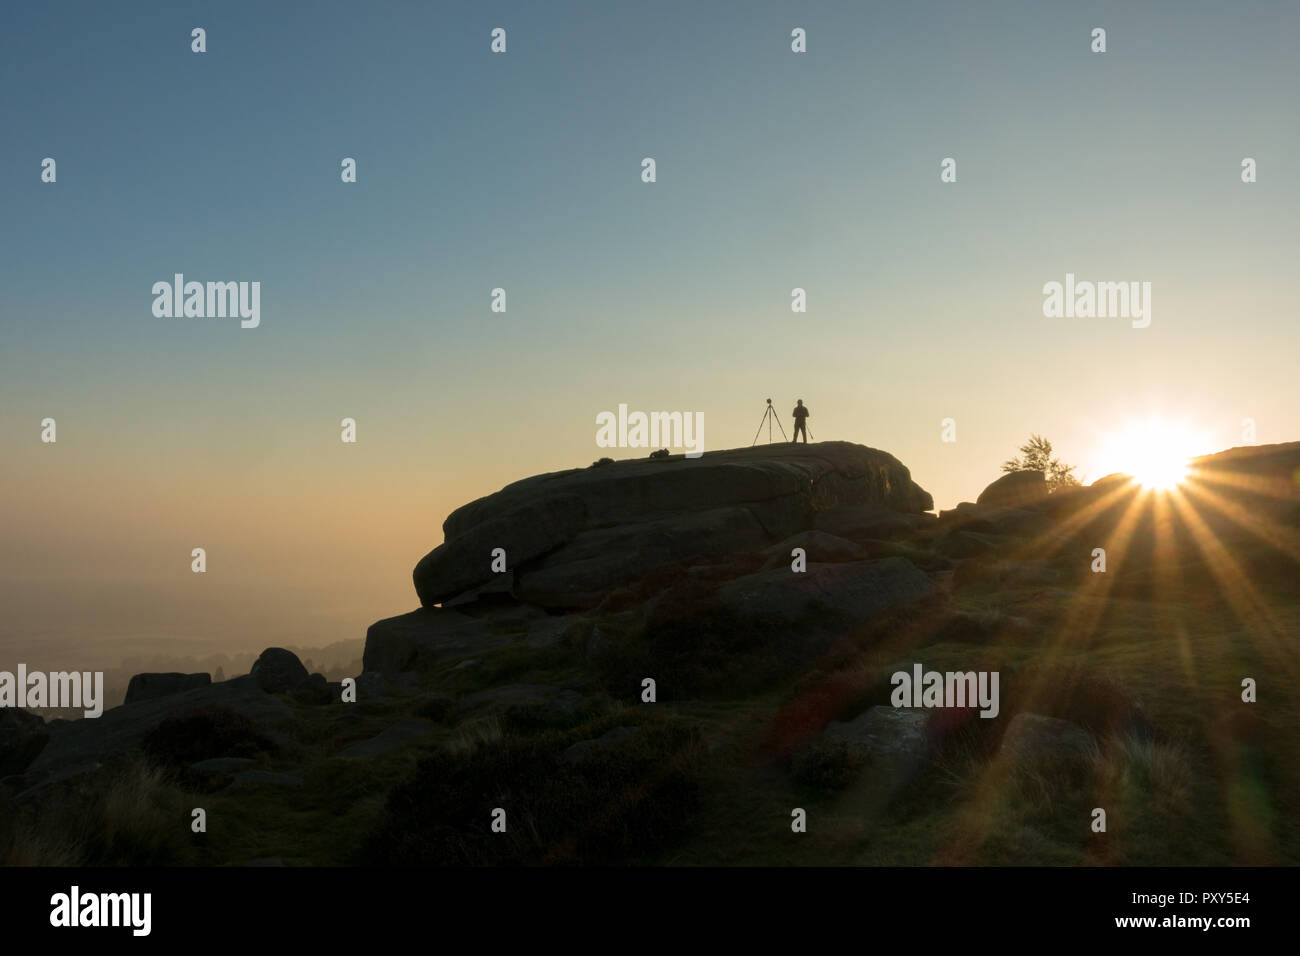 Silhouette of a photographer with a tripod set up taking landscape photos of the sunrise on Ilkley Moor's Cow and Calf Rocks, West Yorkshire, UK Stock Photo